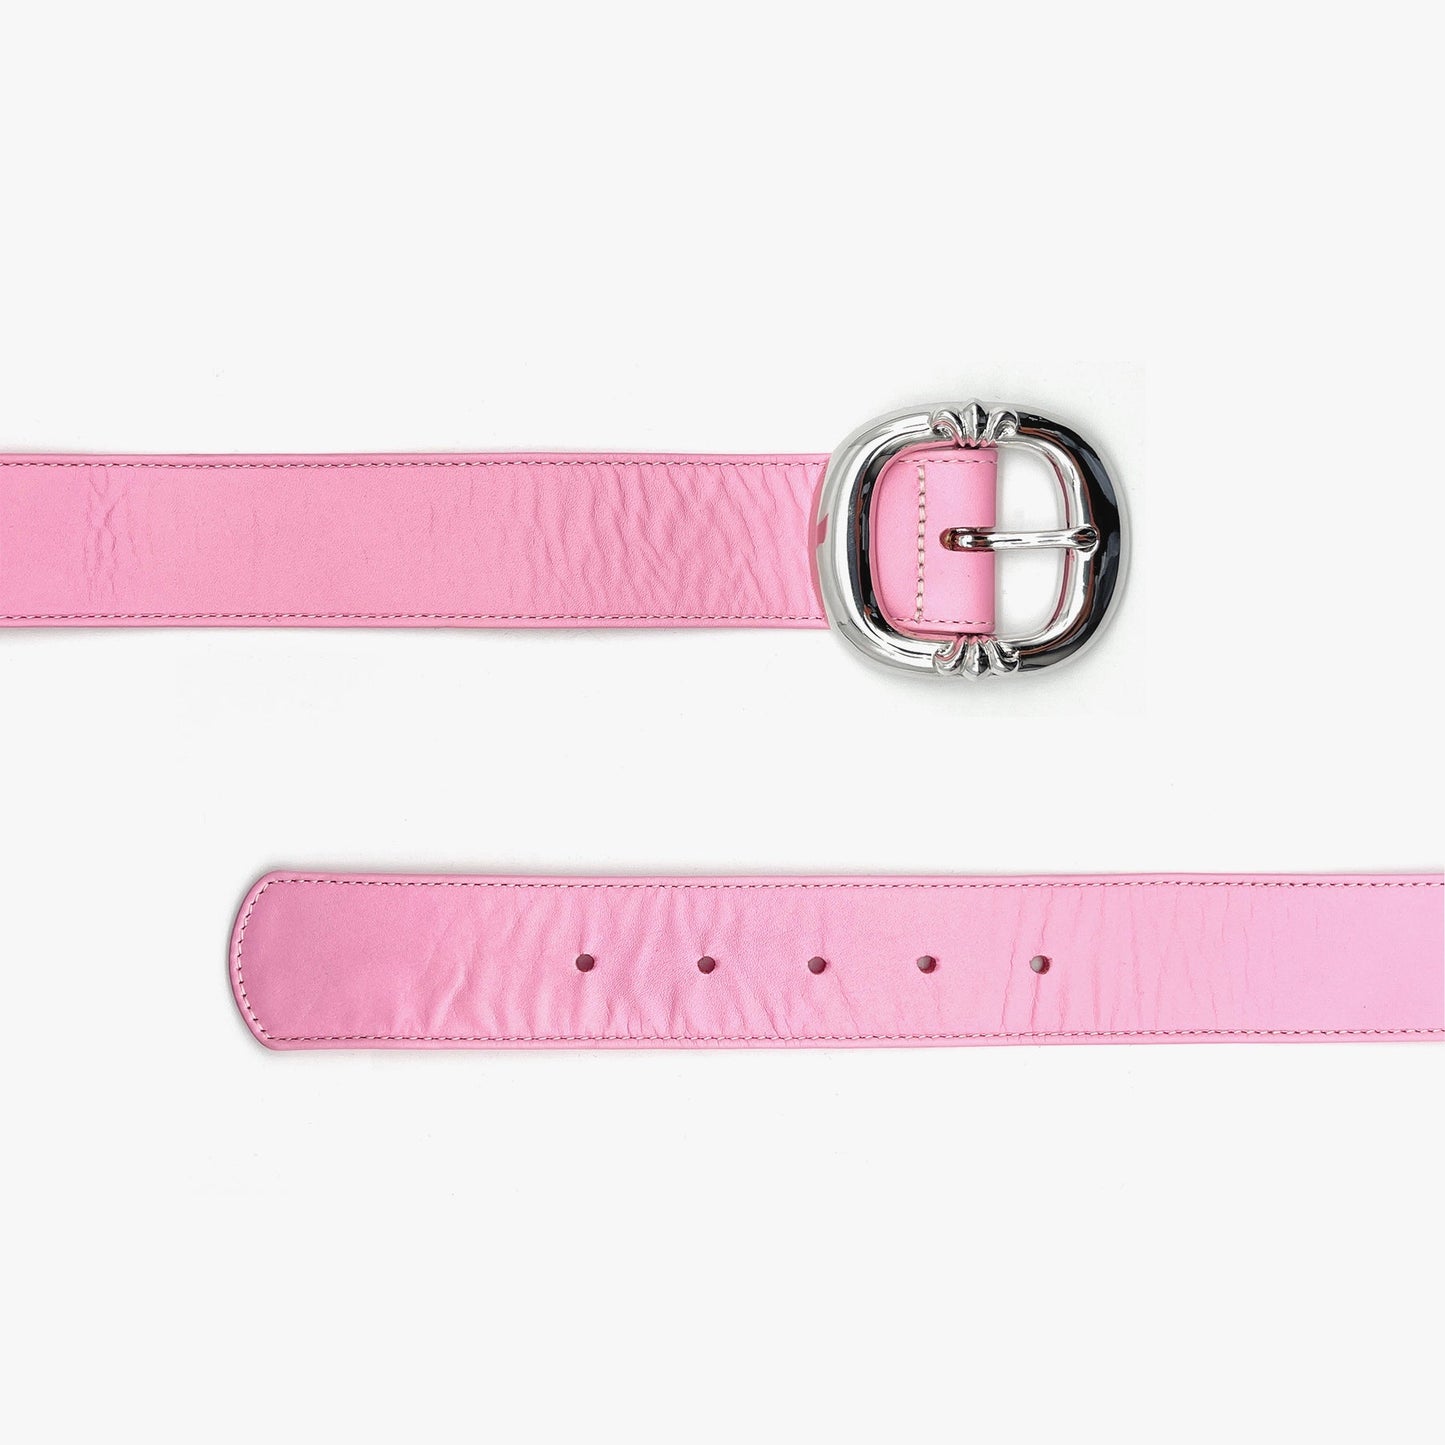 Chrome Hearts Pink Leather Belt with Silver Buckle - SHENGLI ROAD MARKET